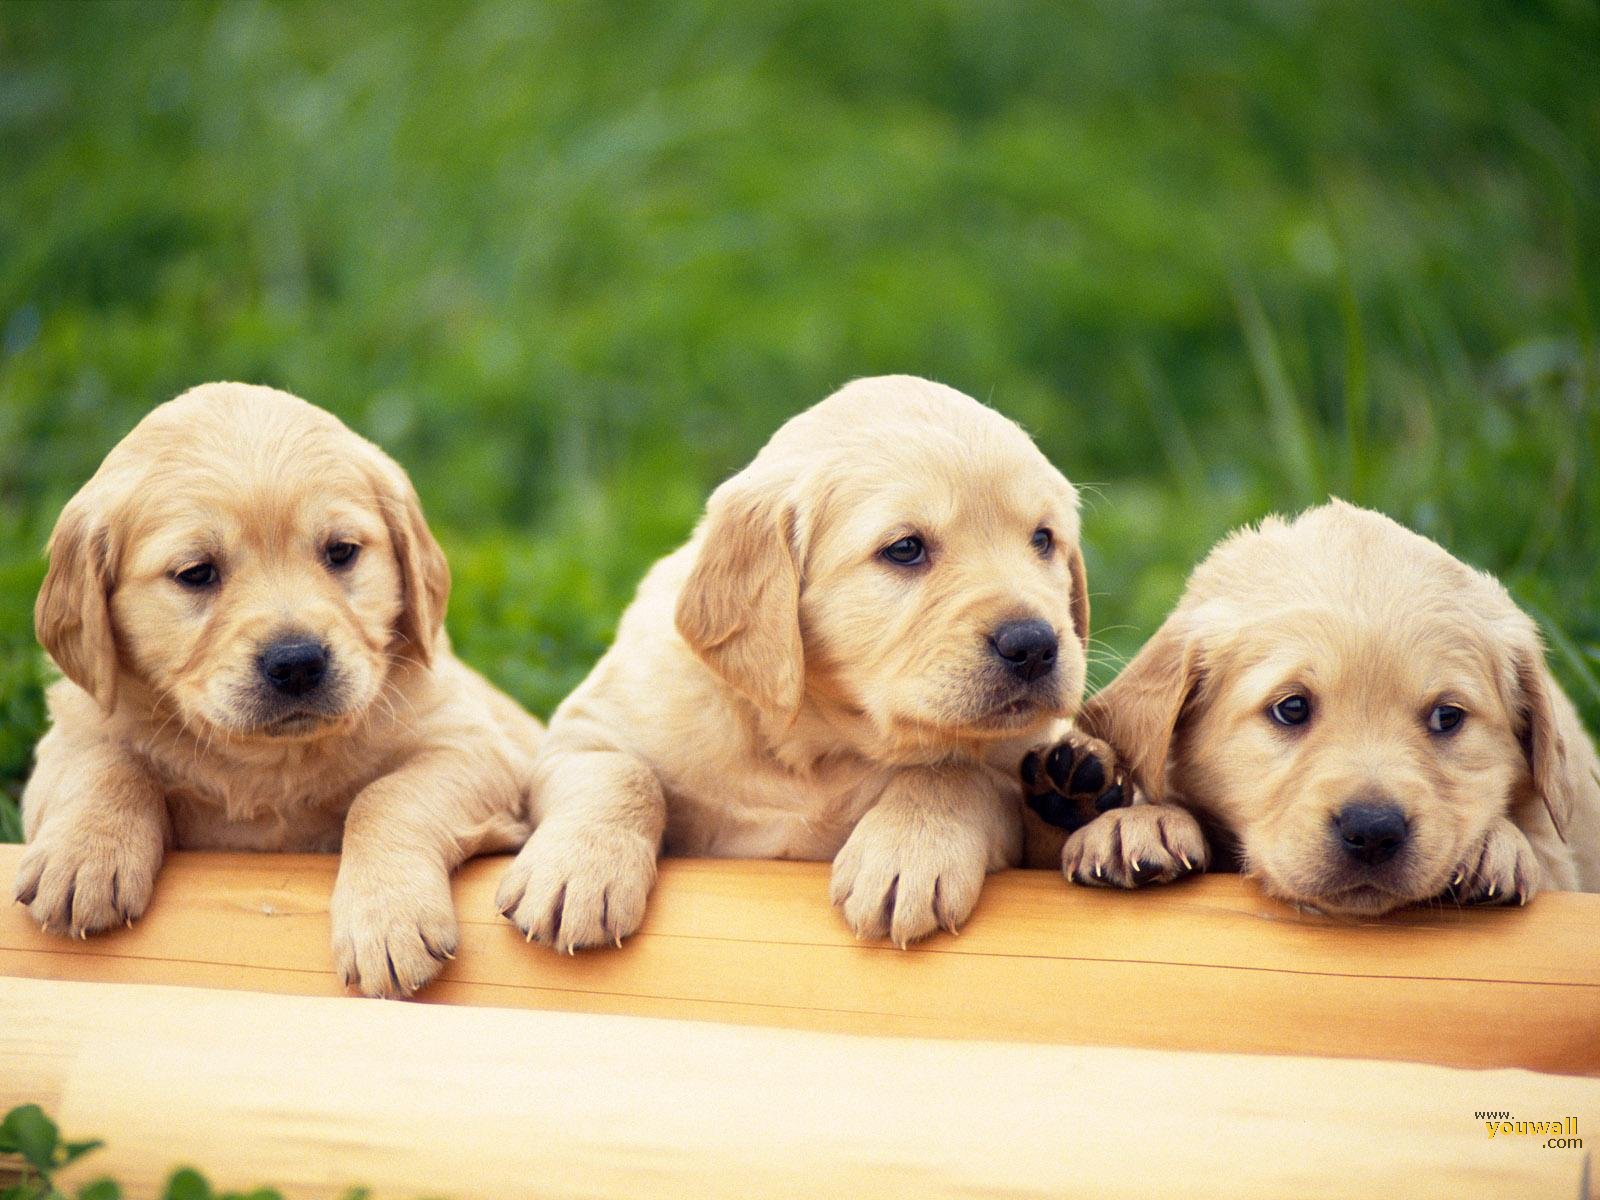 Dogs Wallpaper, Dog Wallpaper - Group Of Cute Puppies , HD Wallpaper & Backgrounds